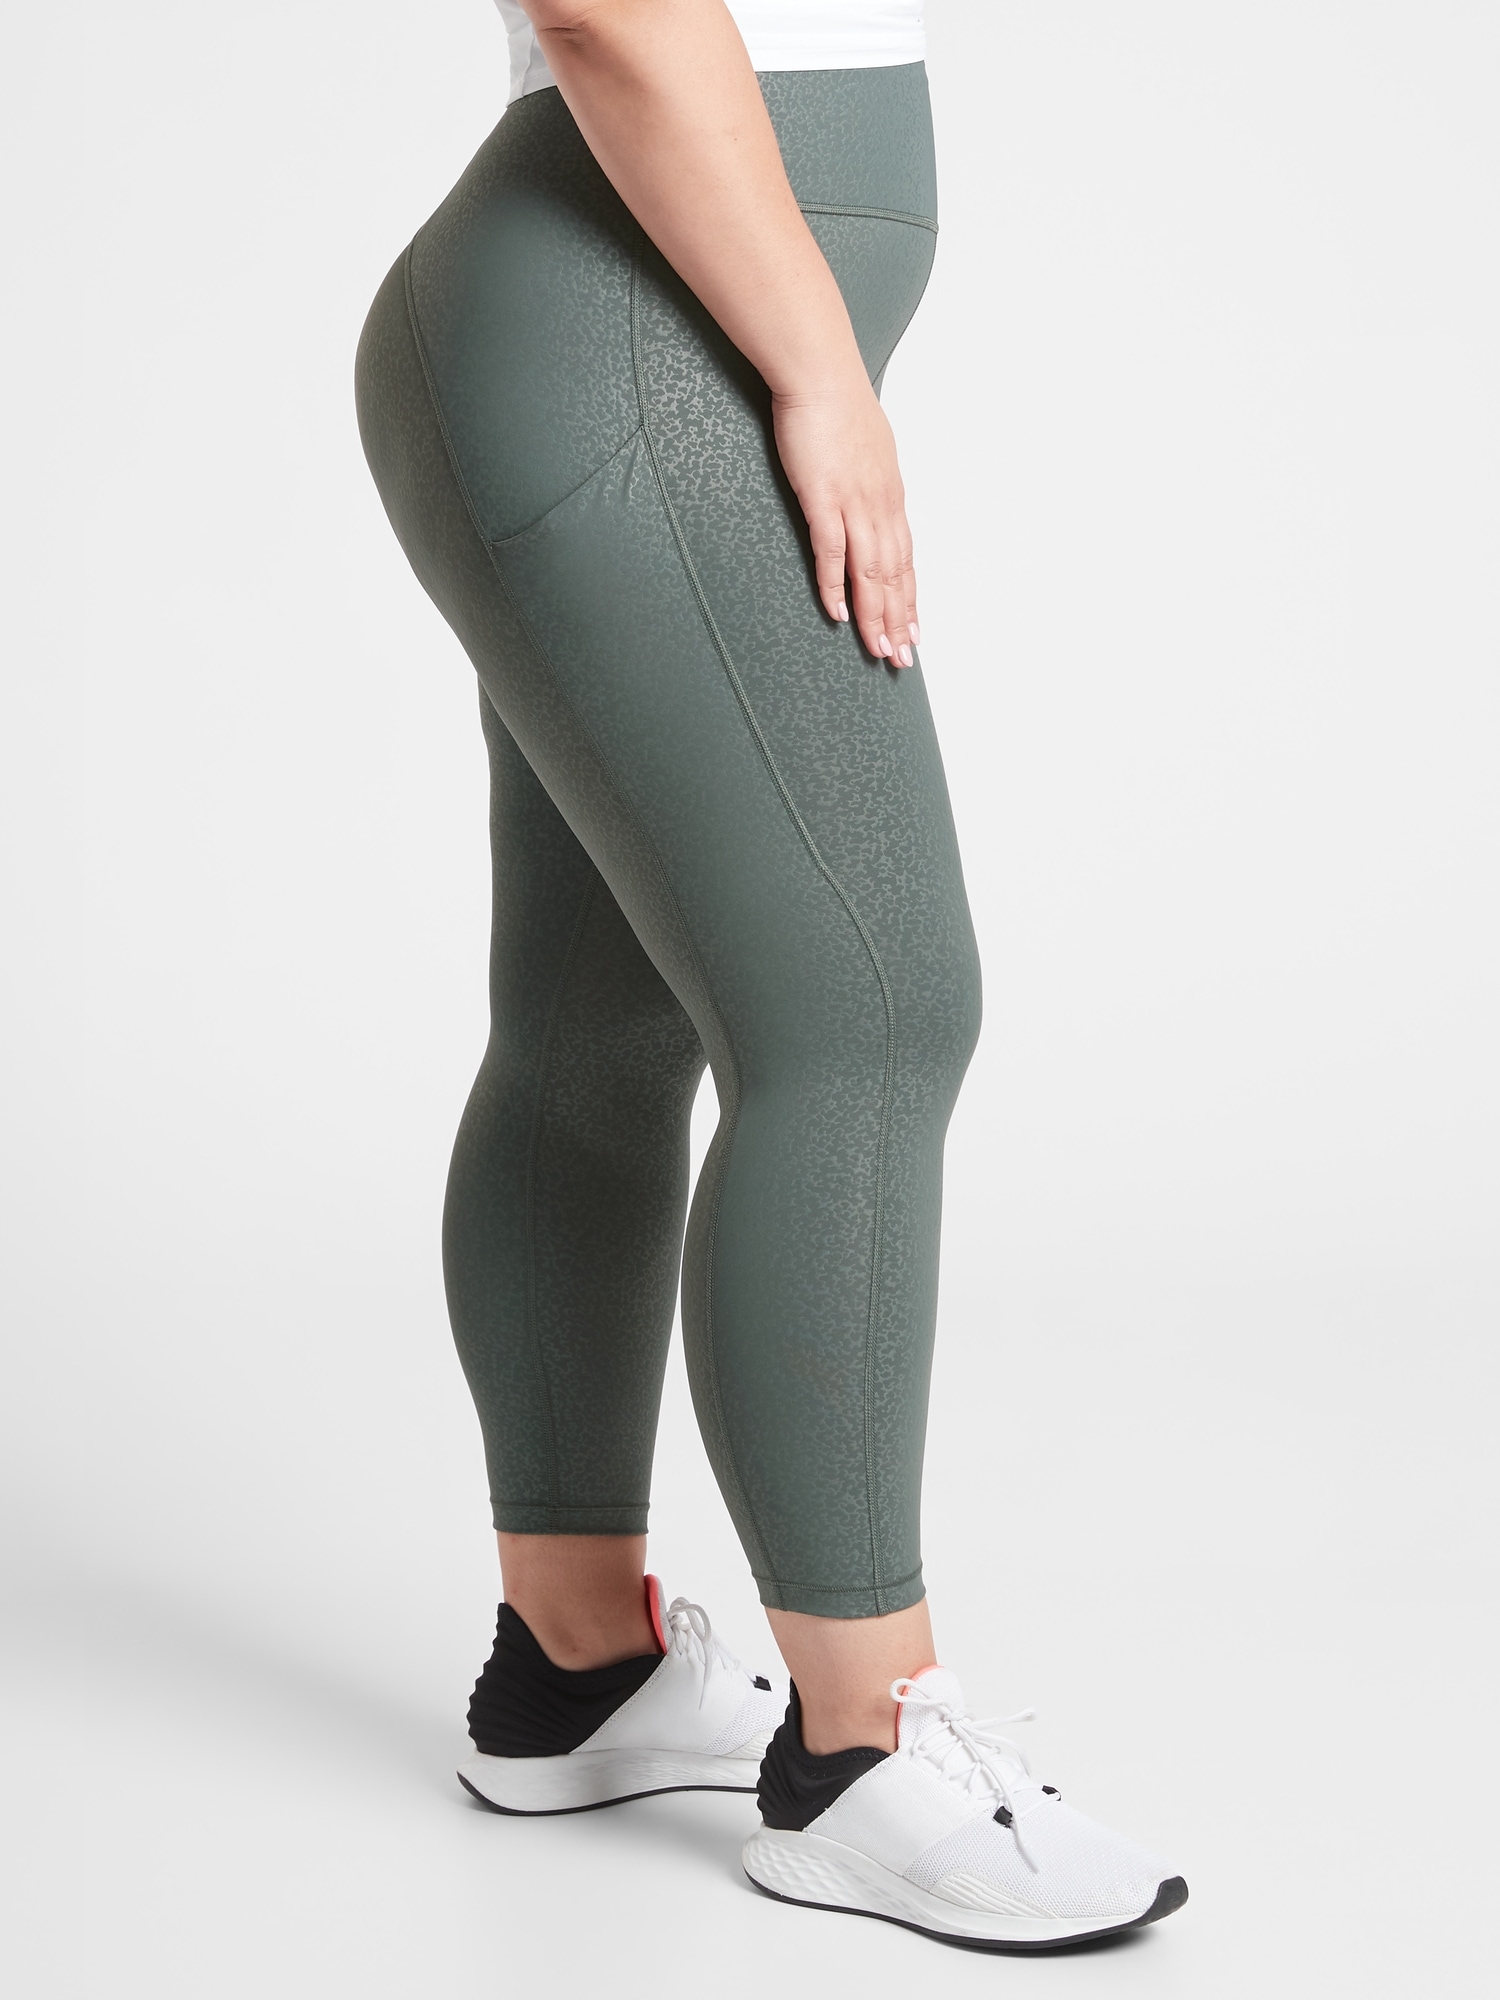 Outdoor Voices - The Hunter 7/8 Warmup Legging is now back in